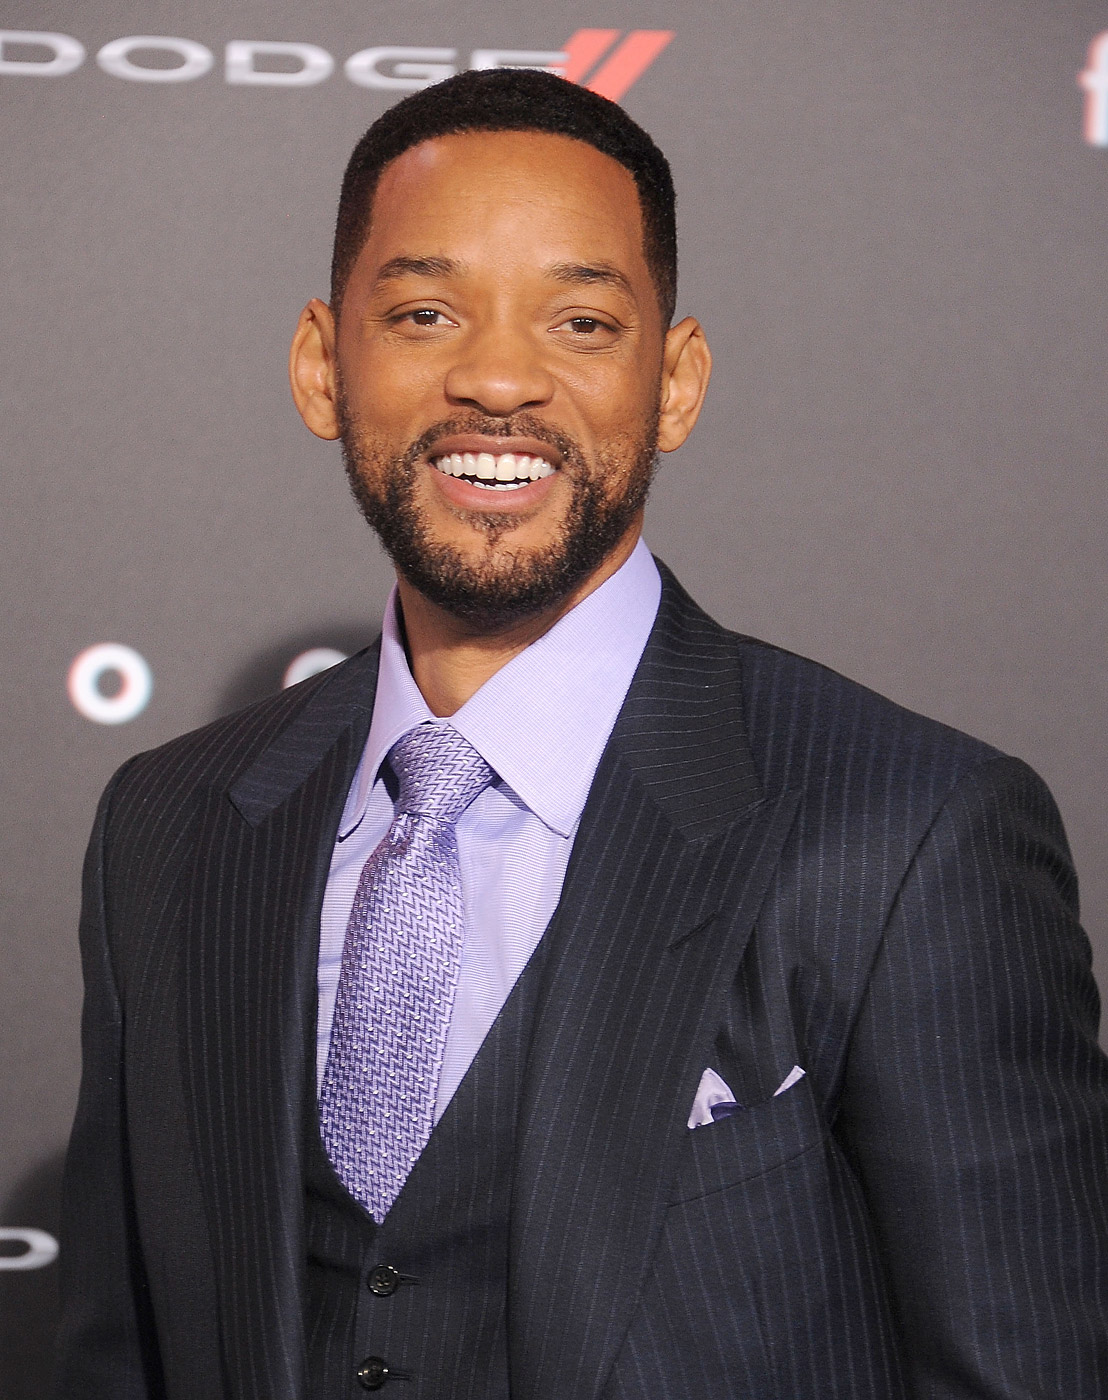 Will Smith Bio, Net Worth, Age, Early Life, Awards, Wife, Children, Education